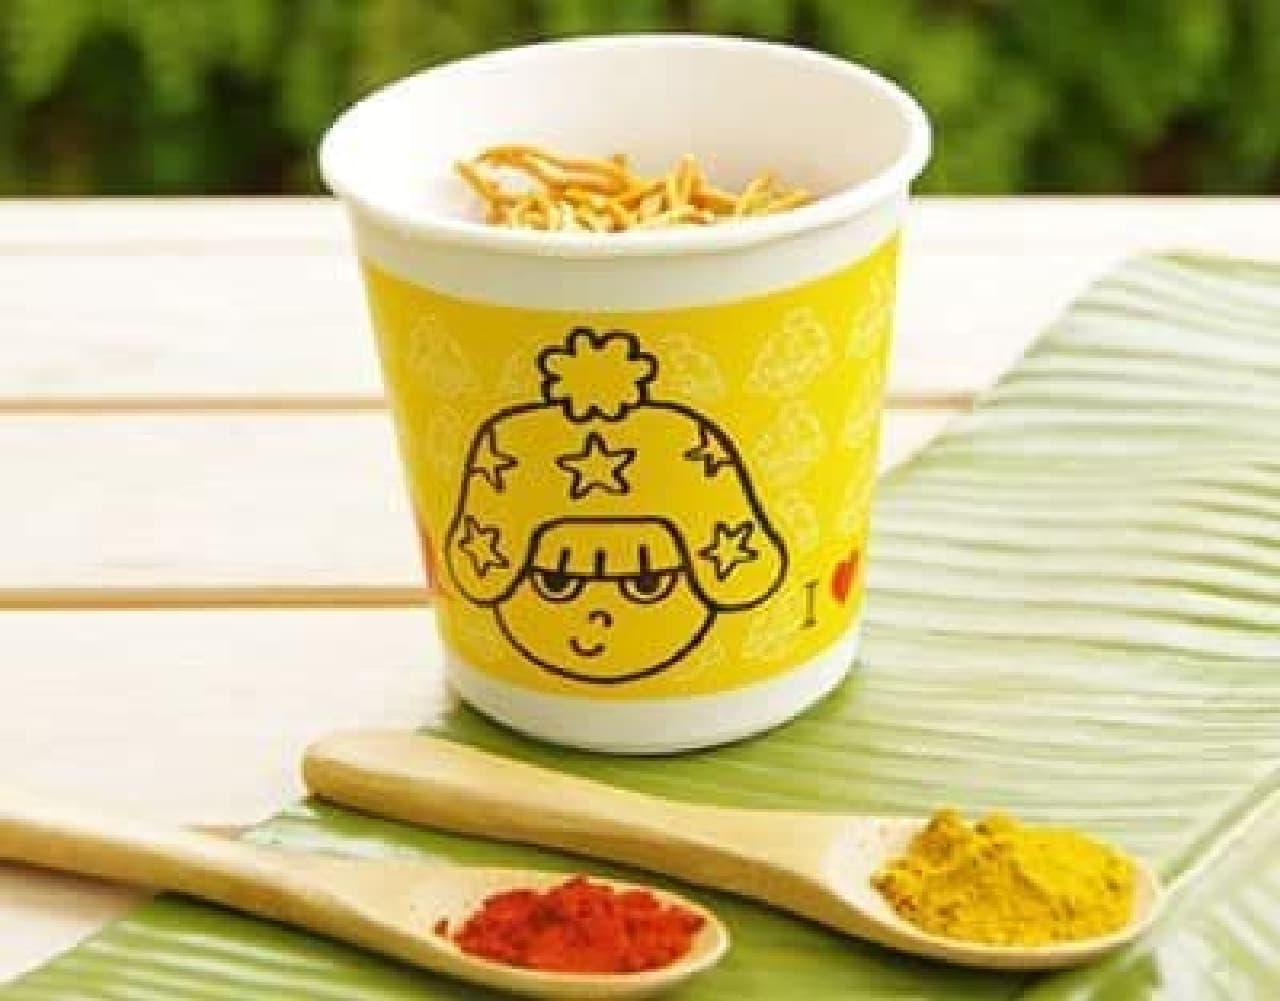 "Freshly made baby star flavor topping" is a sweet that you can enjoy by adding flavor powder to the freshly made snack "Baby Star".